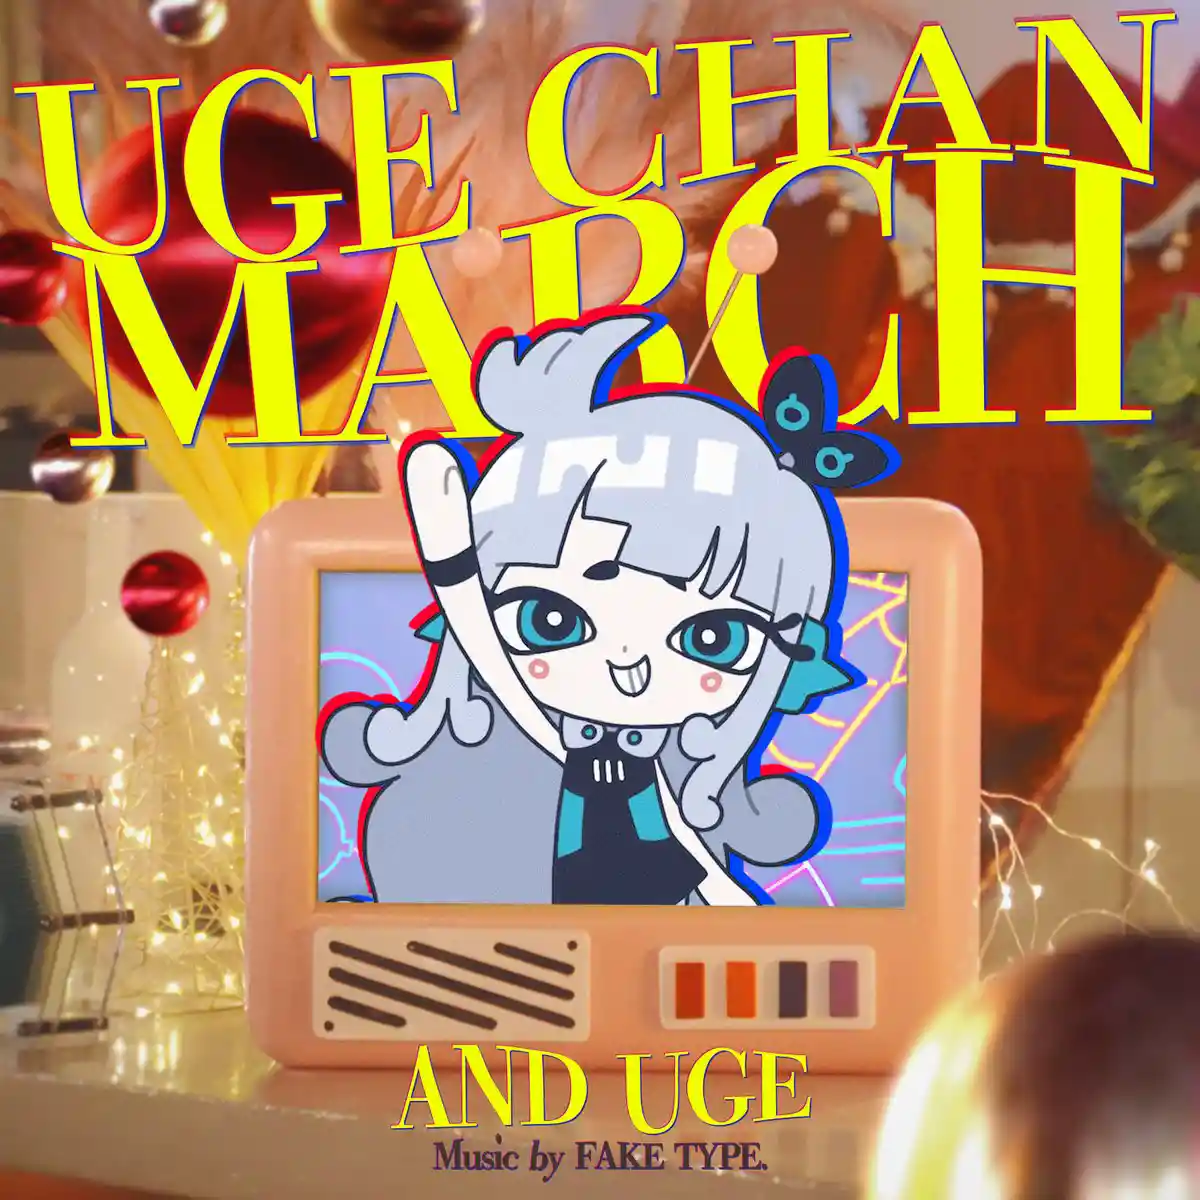 UGE CHAN MARCH